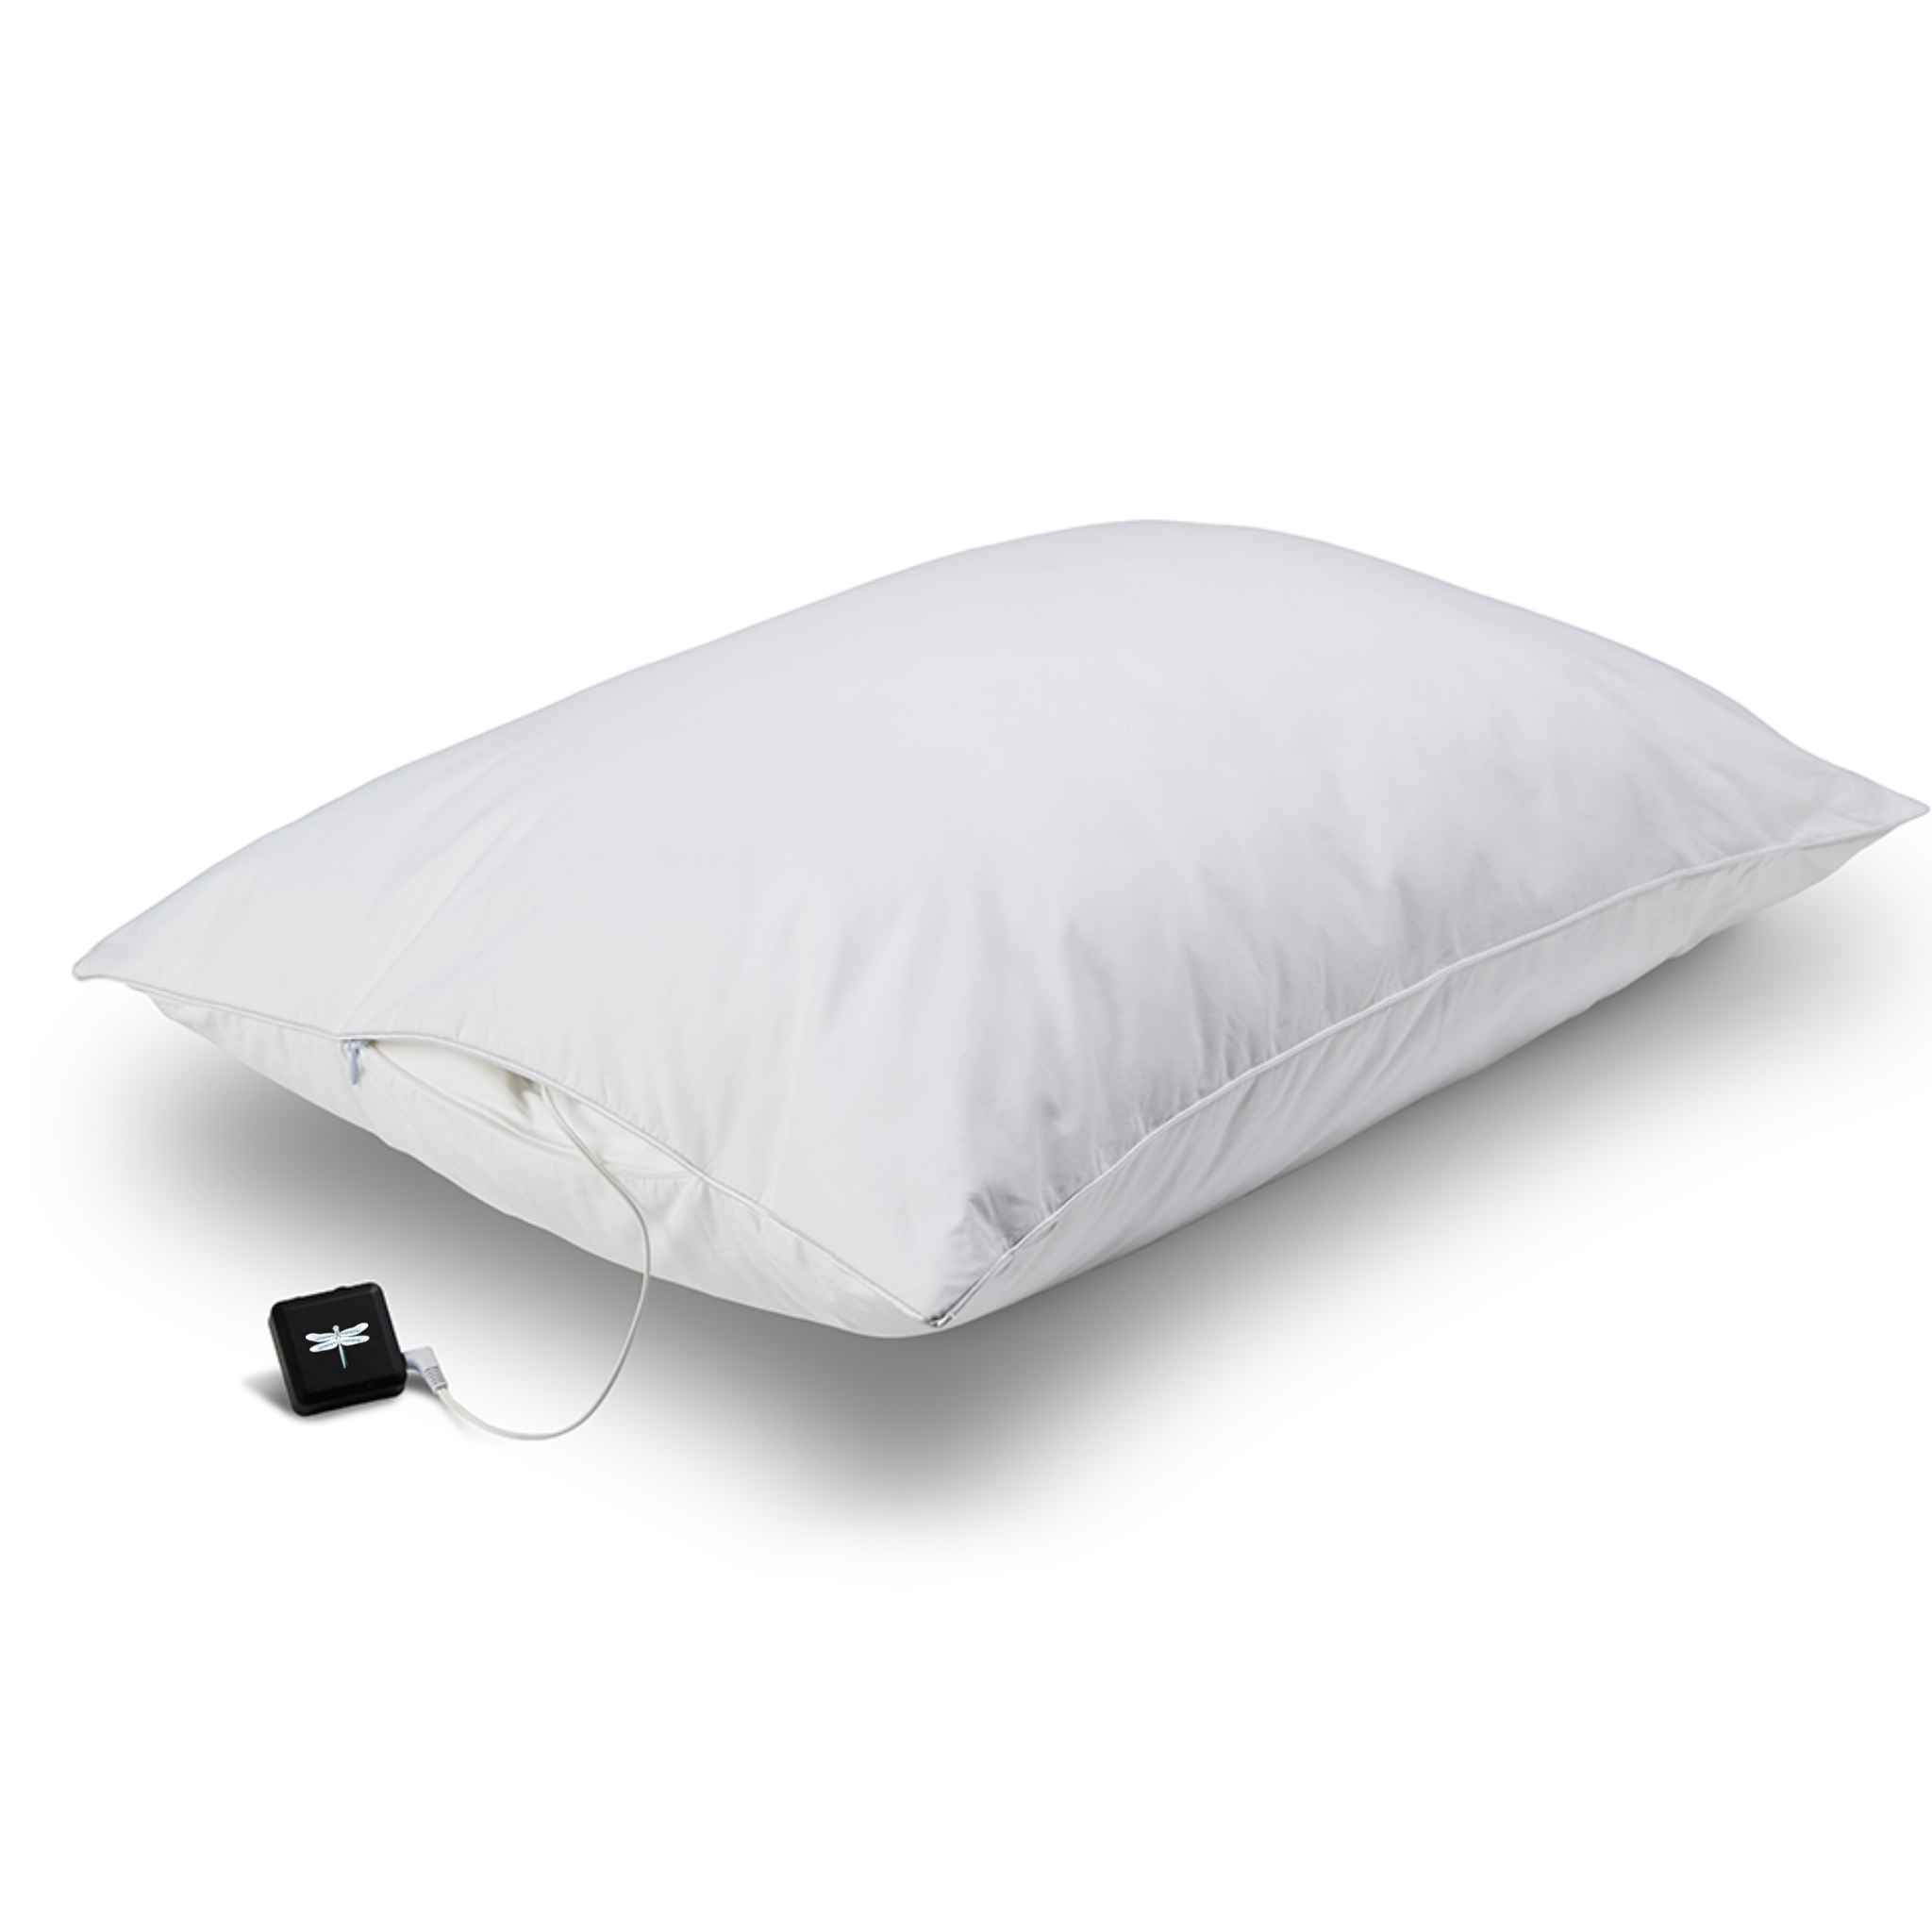 Firm Support Sound Pillow - Dreampad